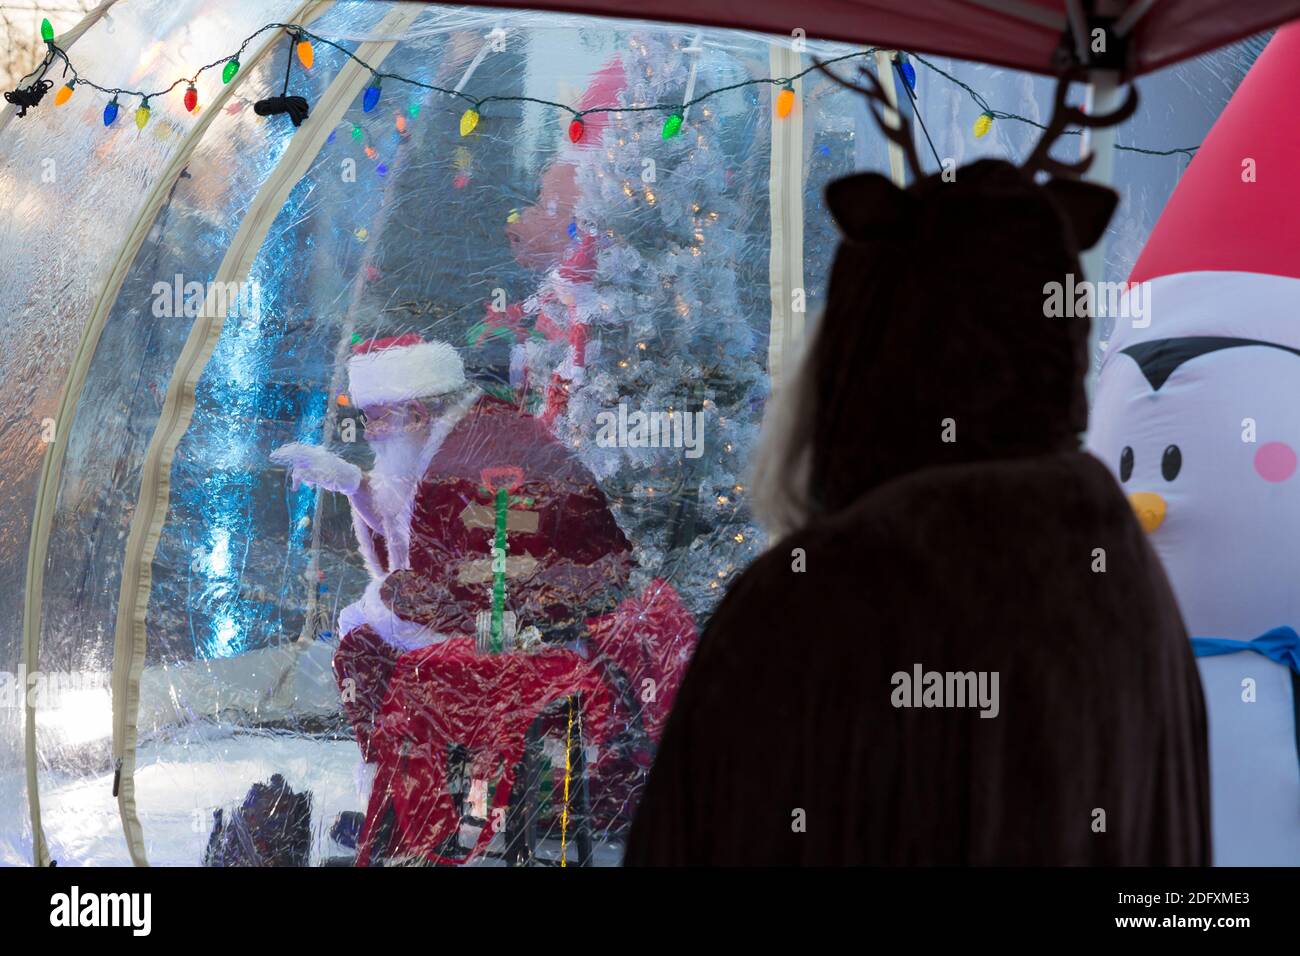 Seattle, Washington, USA. 6th December, 2020. Assistant LaRae Weidner looks on as Dan Kemmis, known as the Seattle Santa, greets visitors from within a protective plastic bubble in Seattle’s Greenwood neighborhood. Unable to schedule private events due to the coronavirus pandemic, Kemmis is making physically distanced public appearances with some donations benefiting local homeless shelters. Credit: Paul Christian Gordon/Alamy Live News Stock Photo